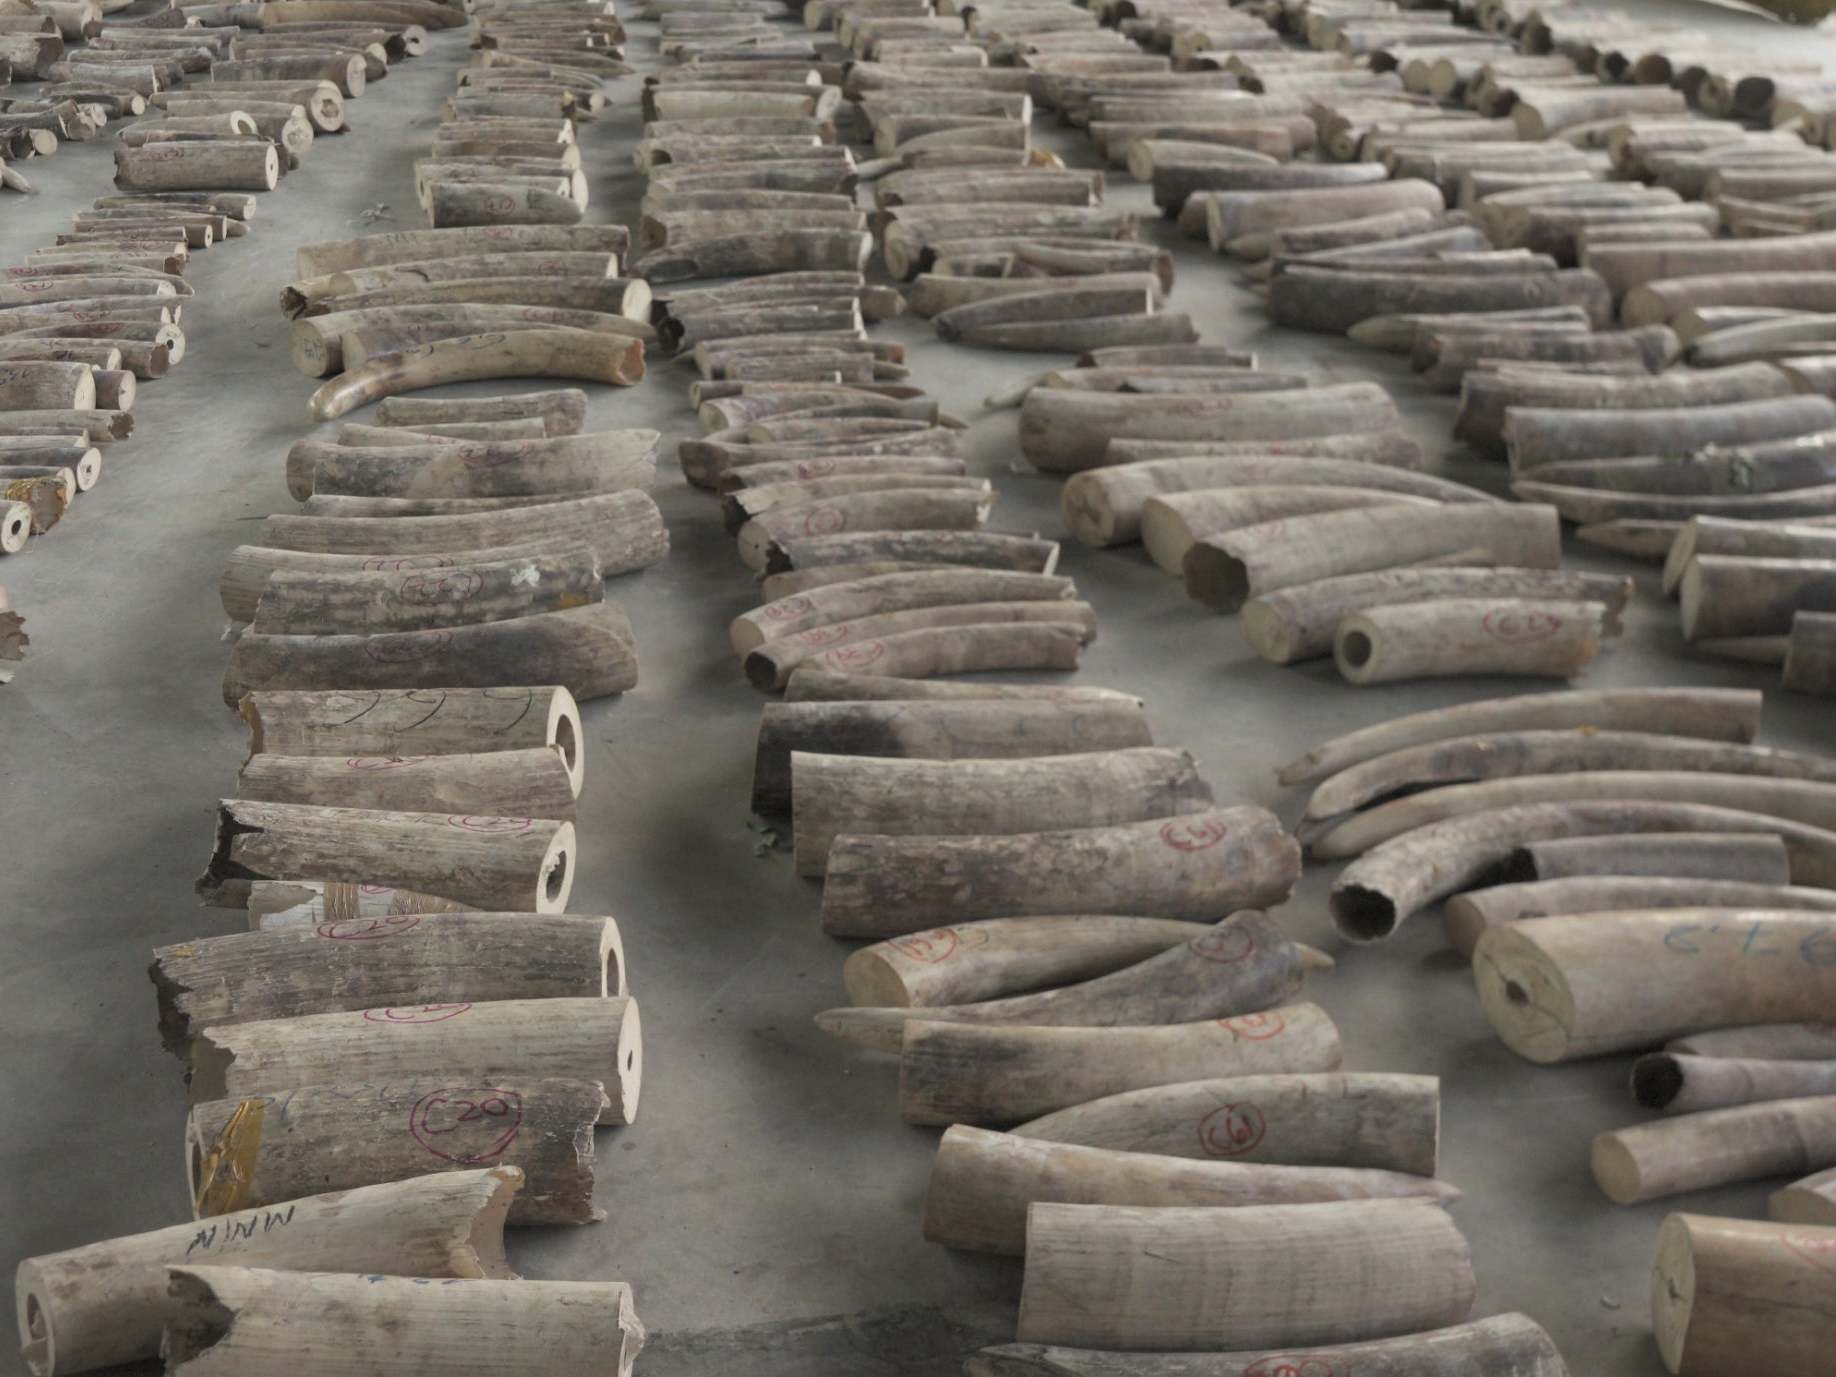 Elephant tusks confiscated in Singapore